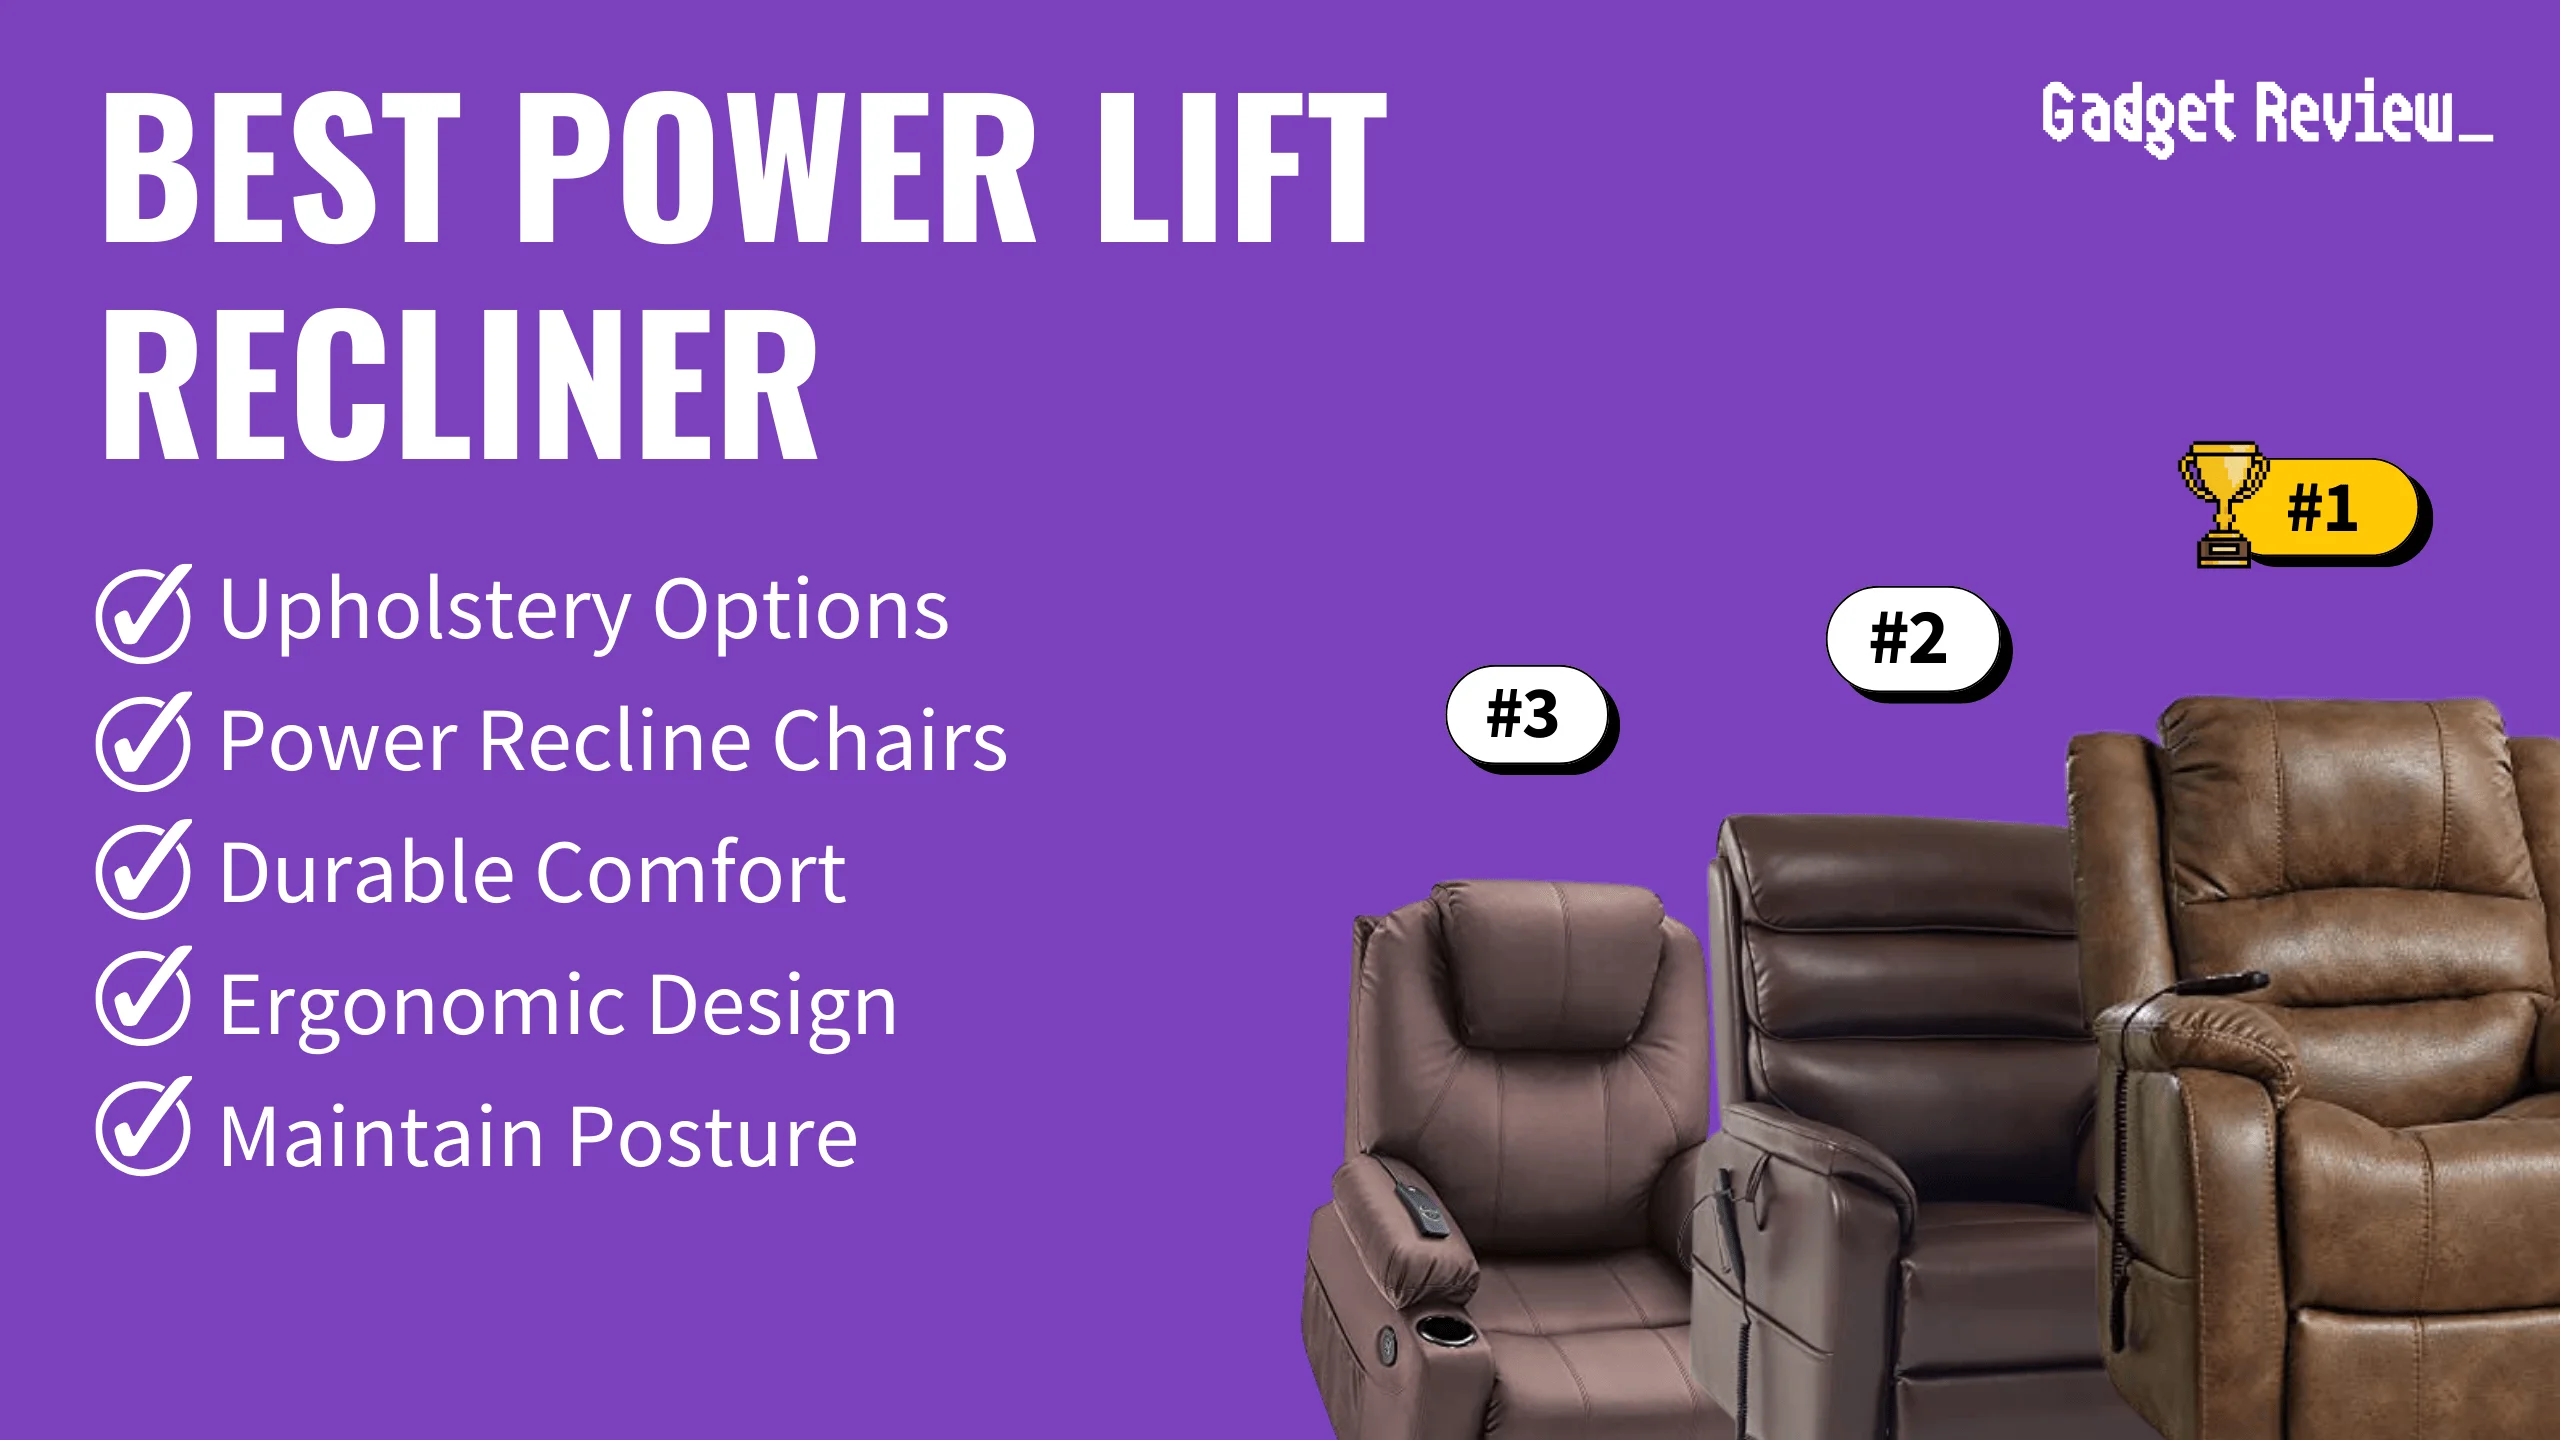 best power lift recliner featured image that shows the top three best health & wellnes models